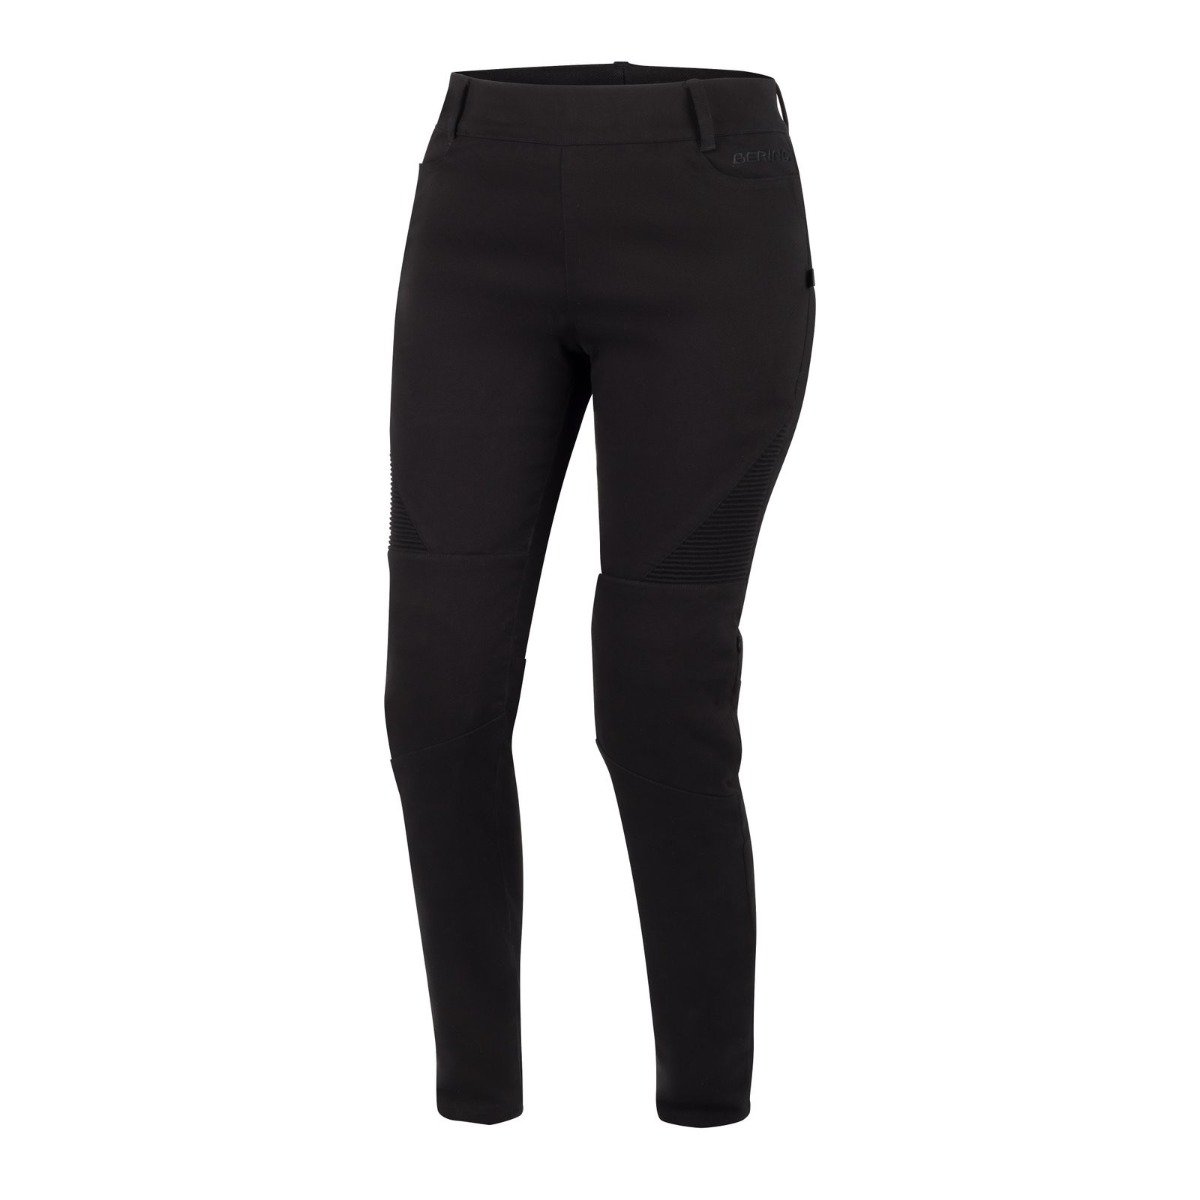 Image of Bering Peggy Black Lady Pants Talla T5